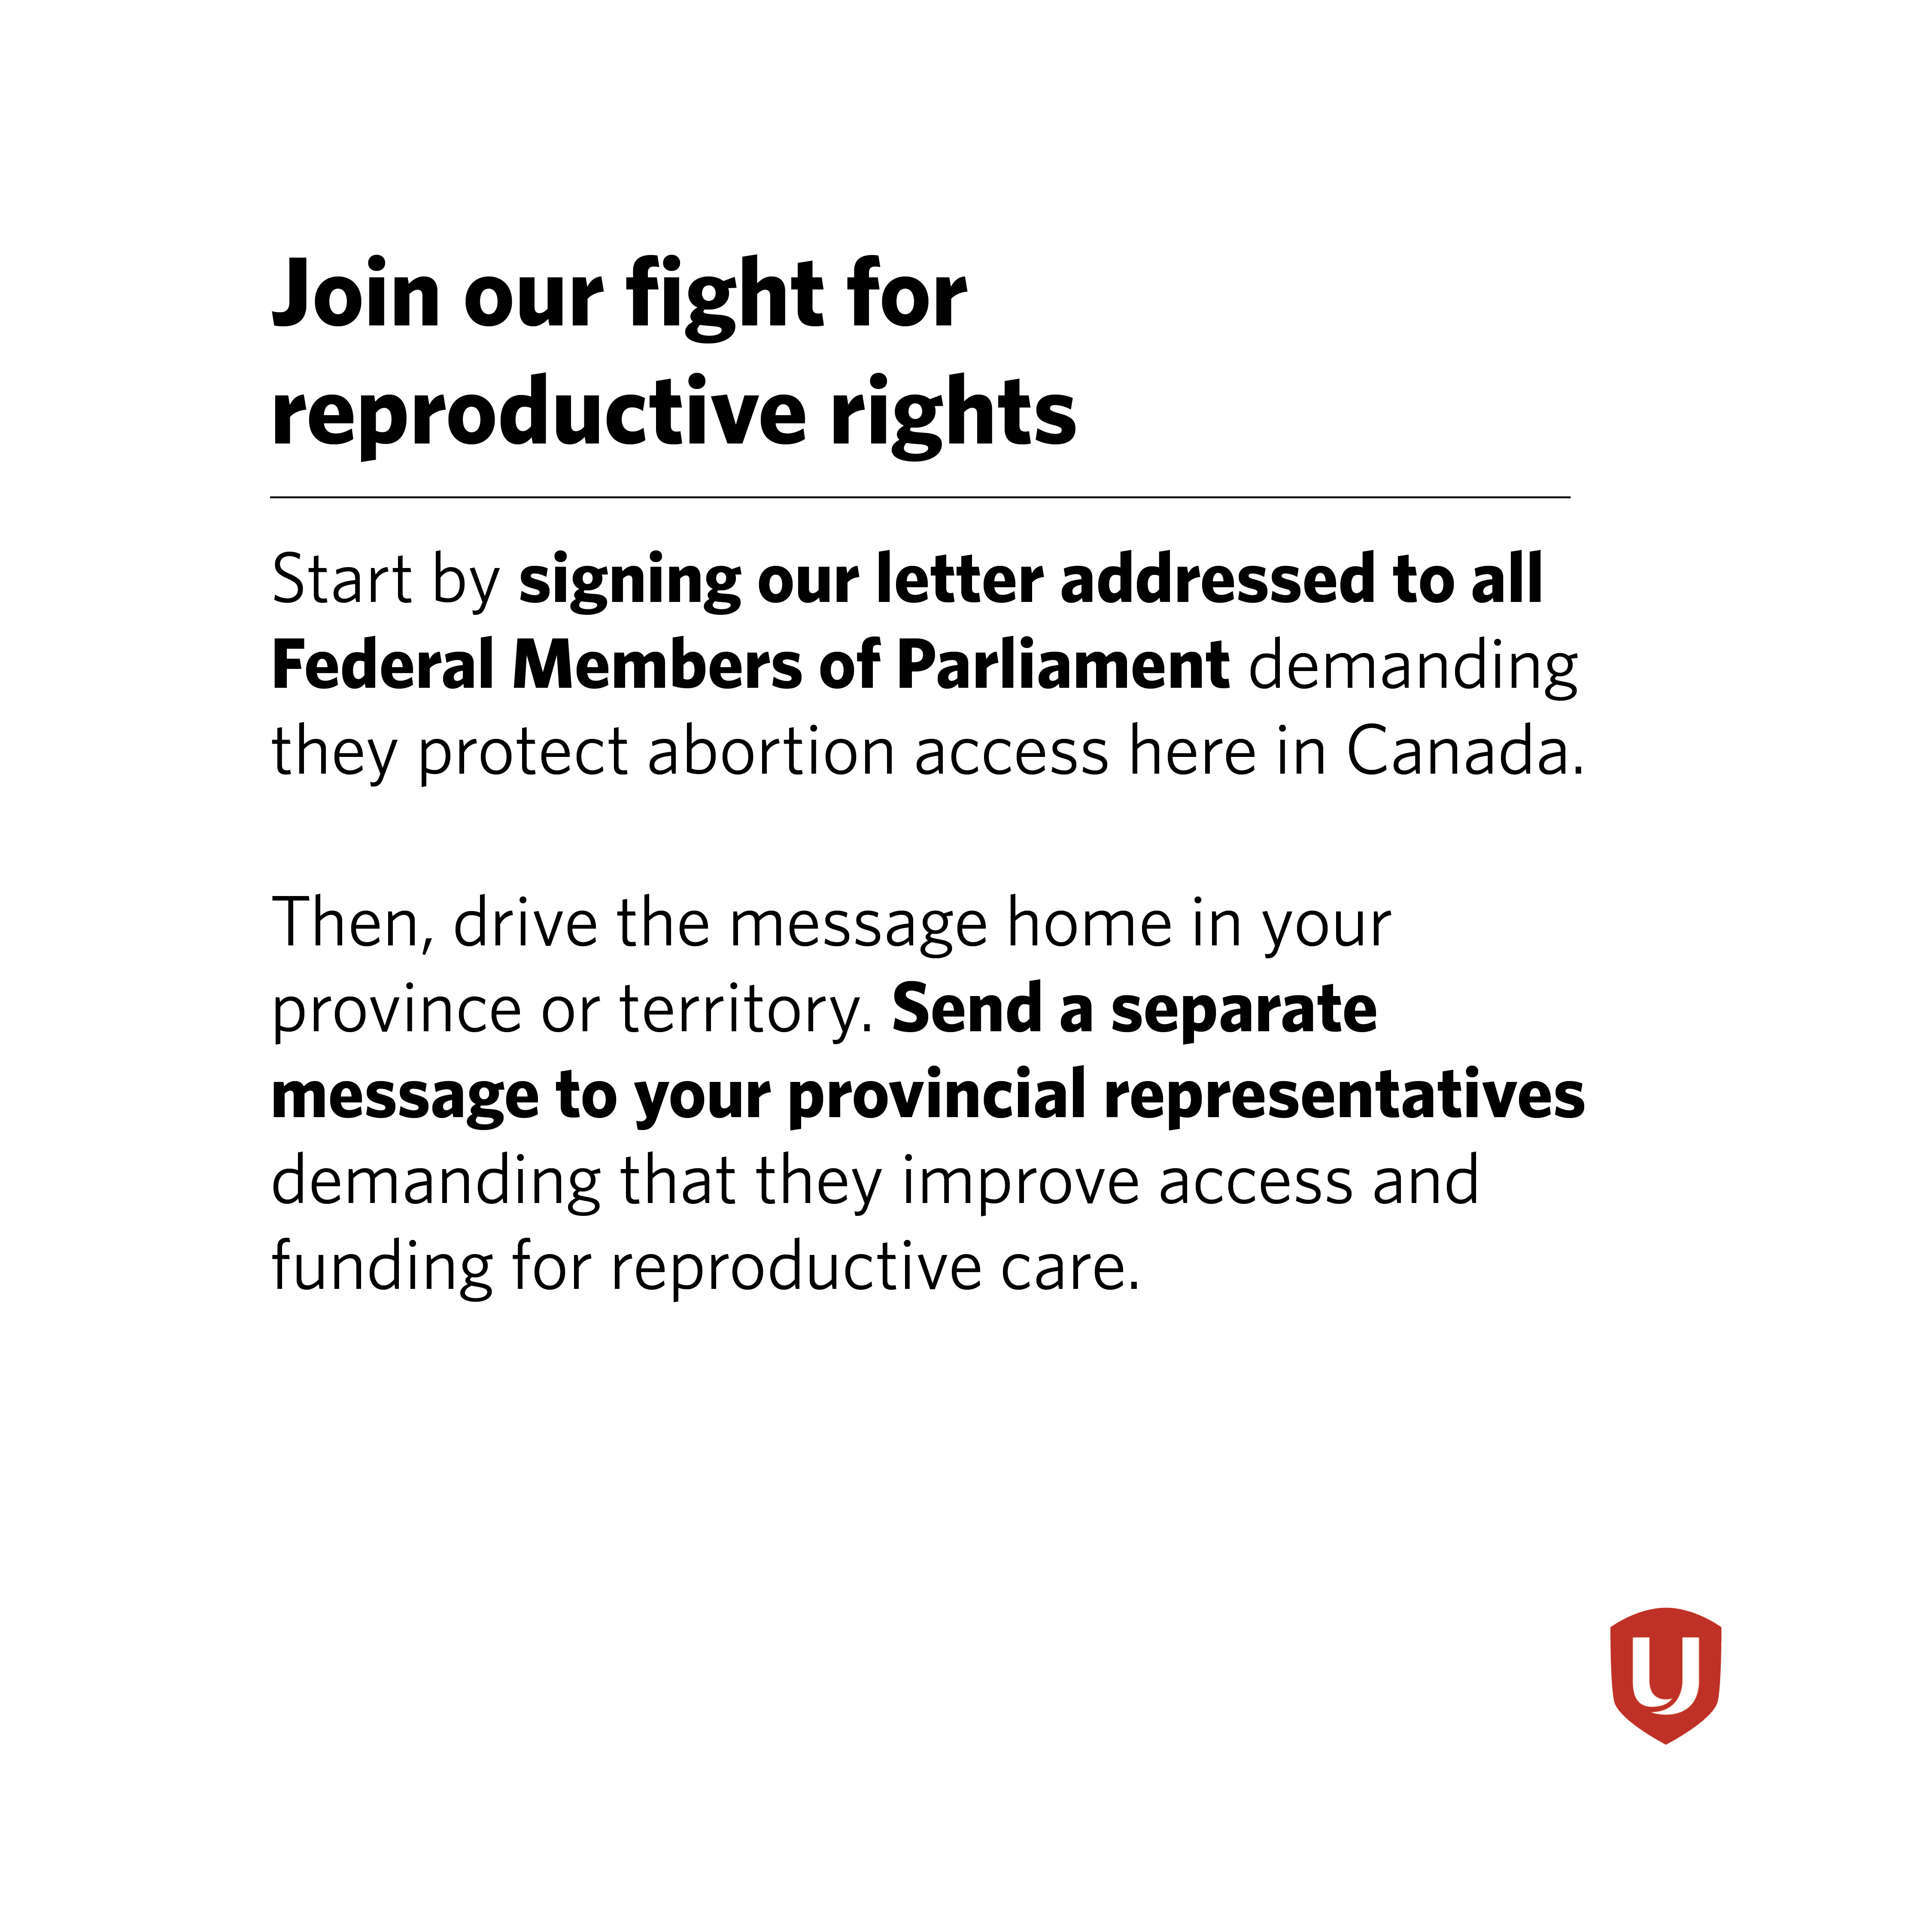 Join our fight for reproductive rights